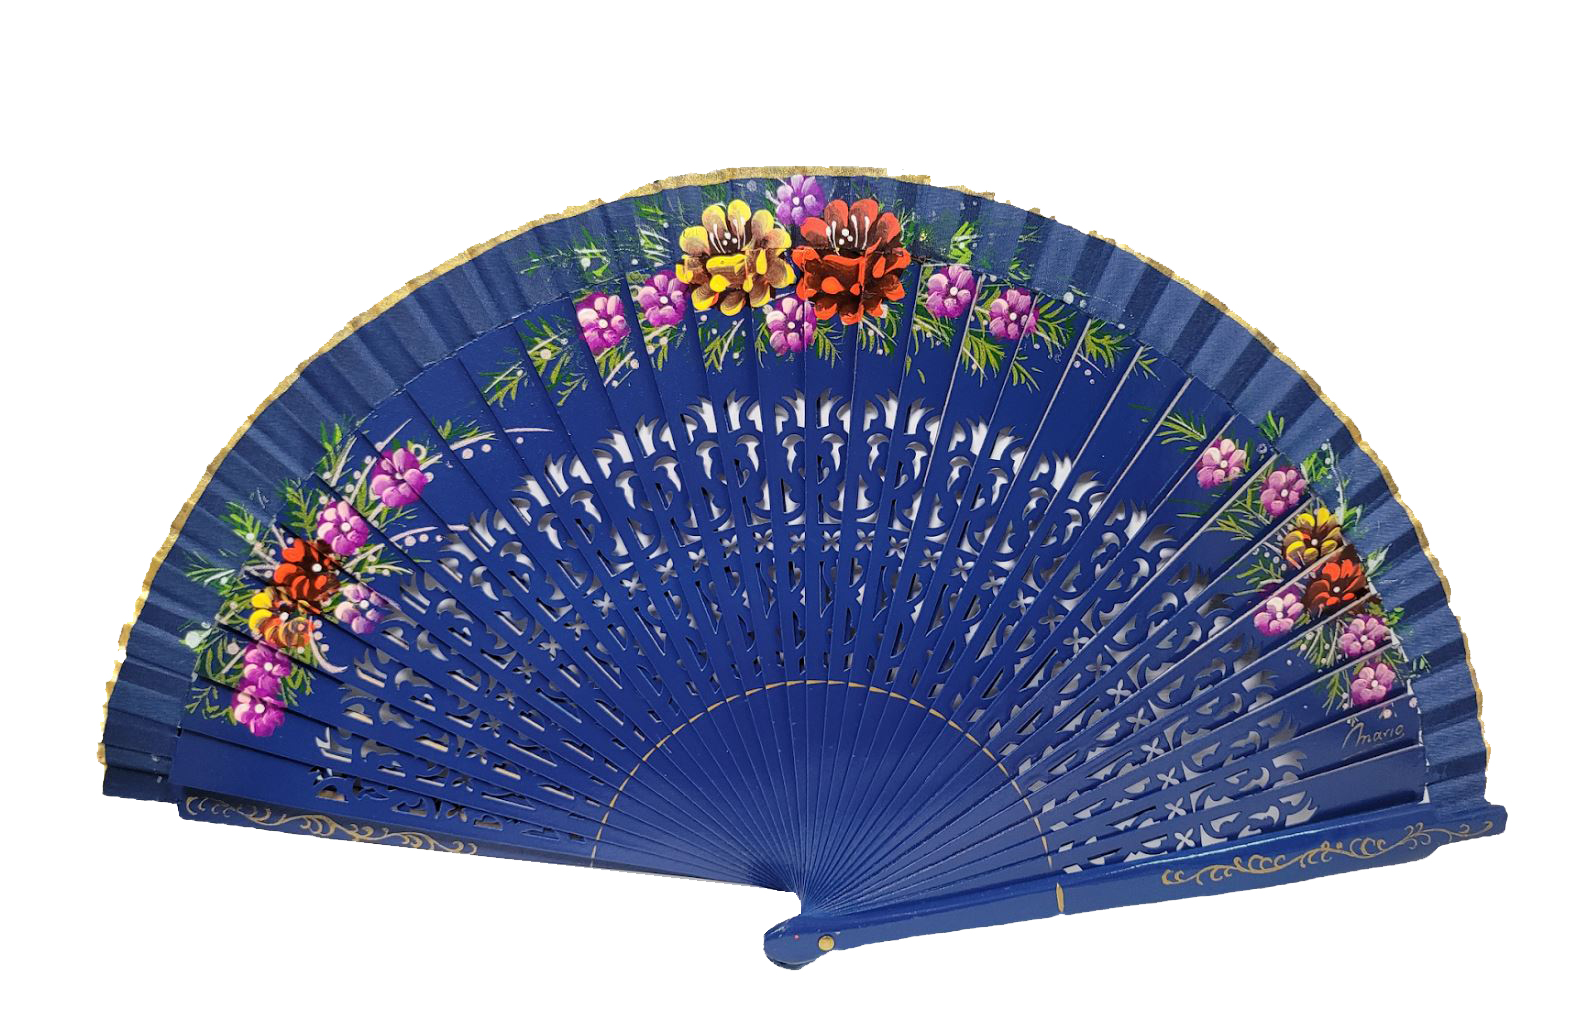 Fretwork Fan and Painted by Two Faces. ref 1138 4.960€ #503281138AZ